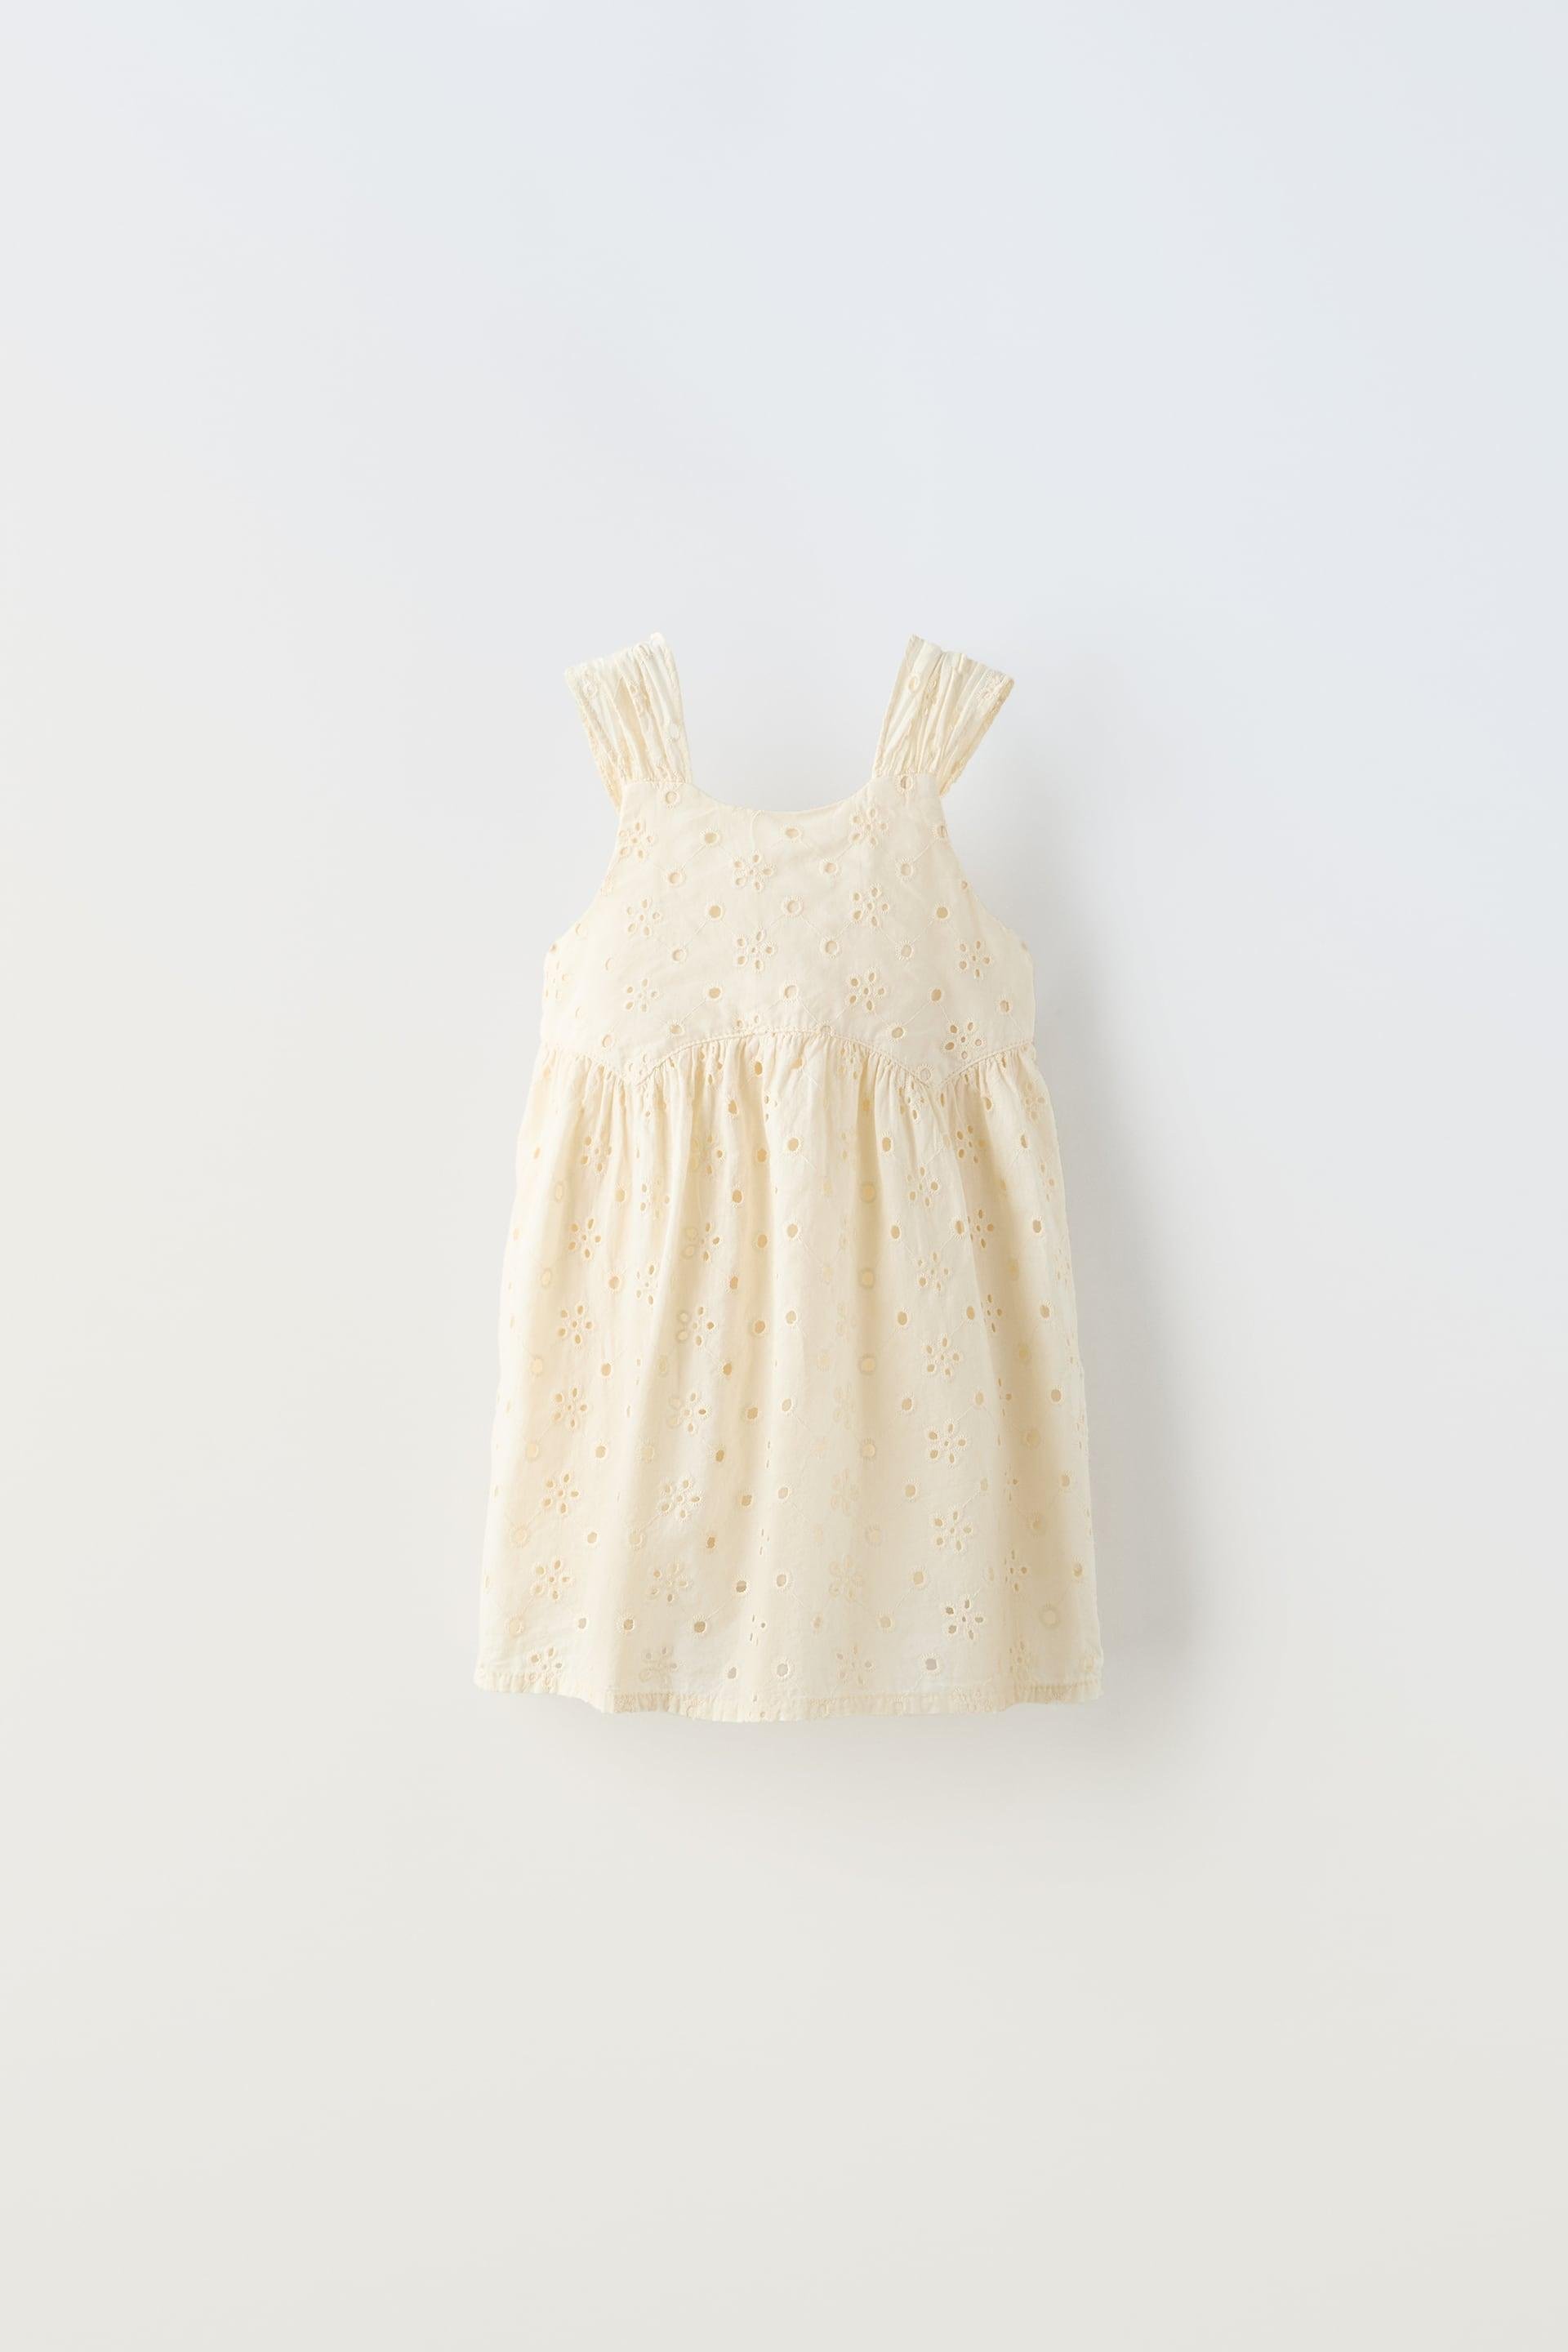 EMBROIDERED DRESS by ZARA